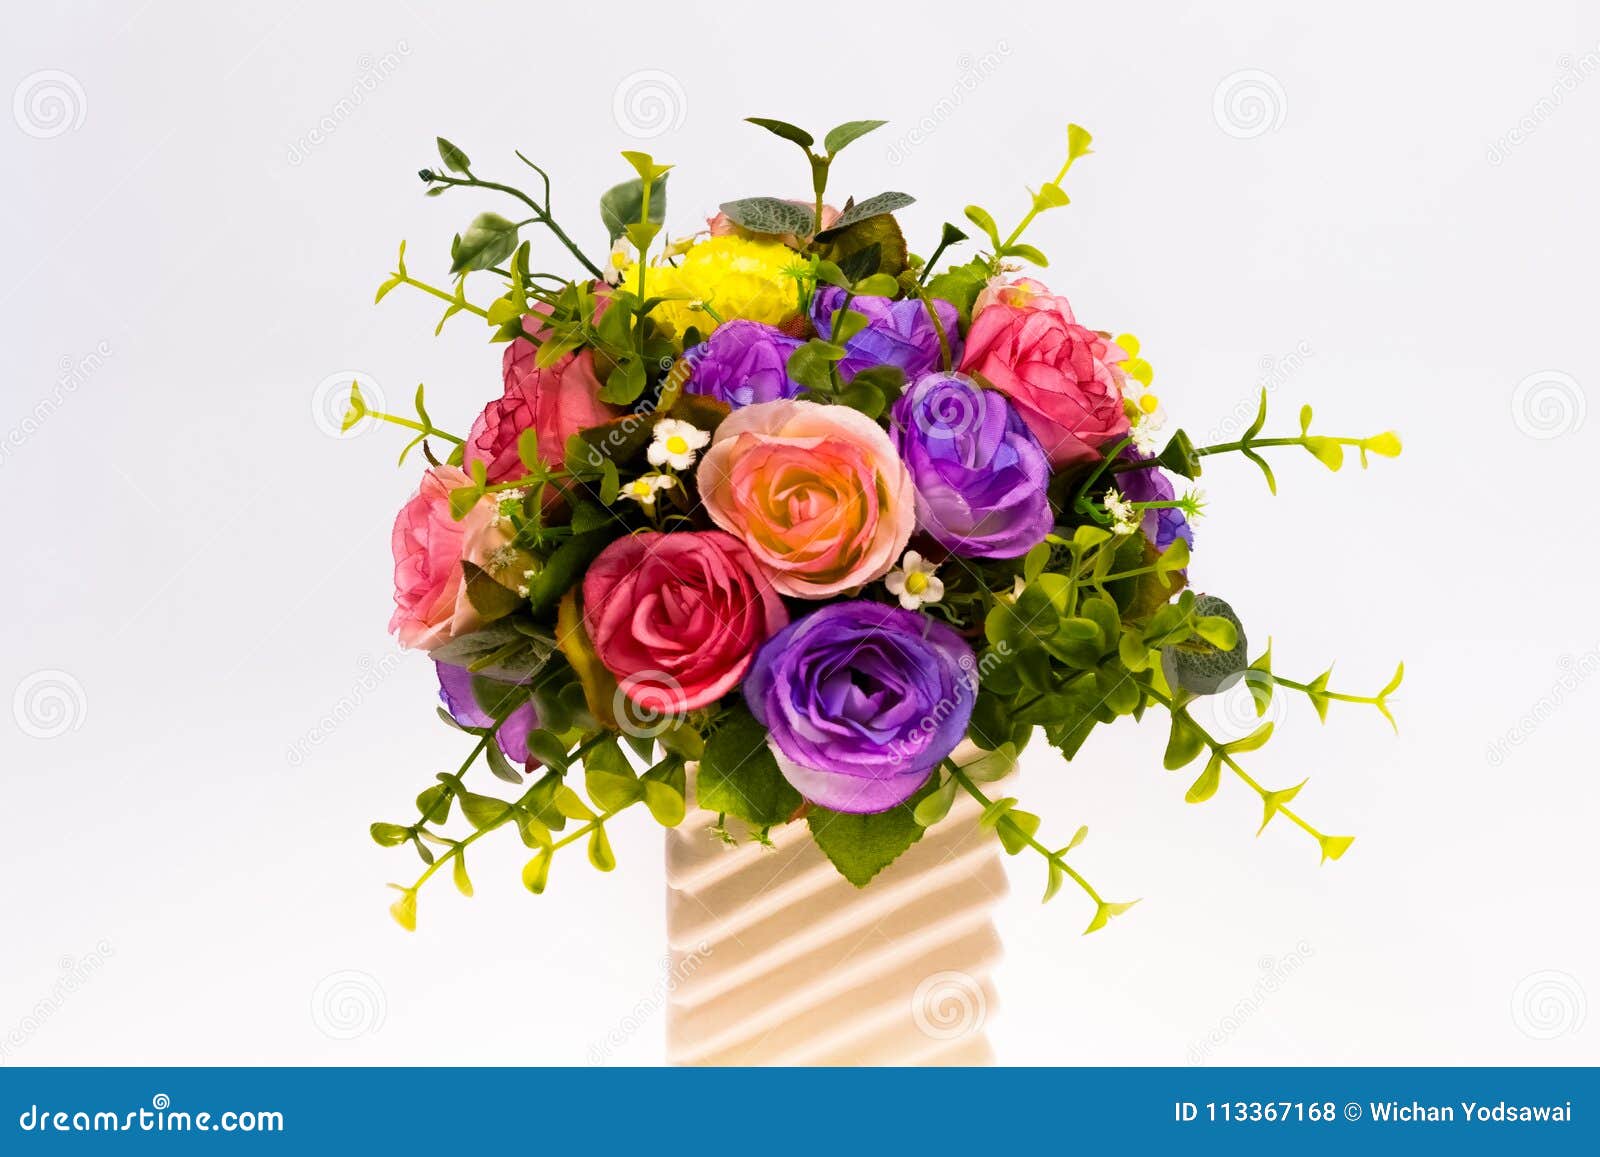 Flower Bouquet on White Background Stock Photo - Image of fresh, color